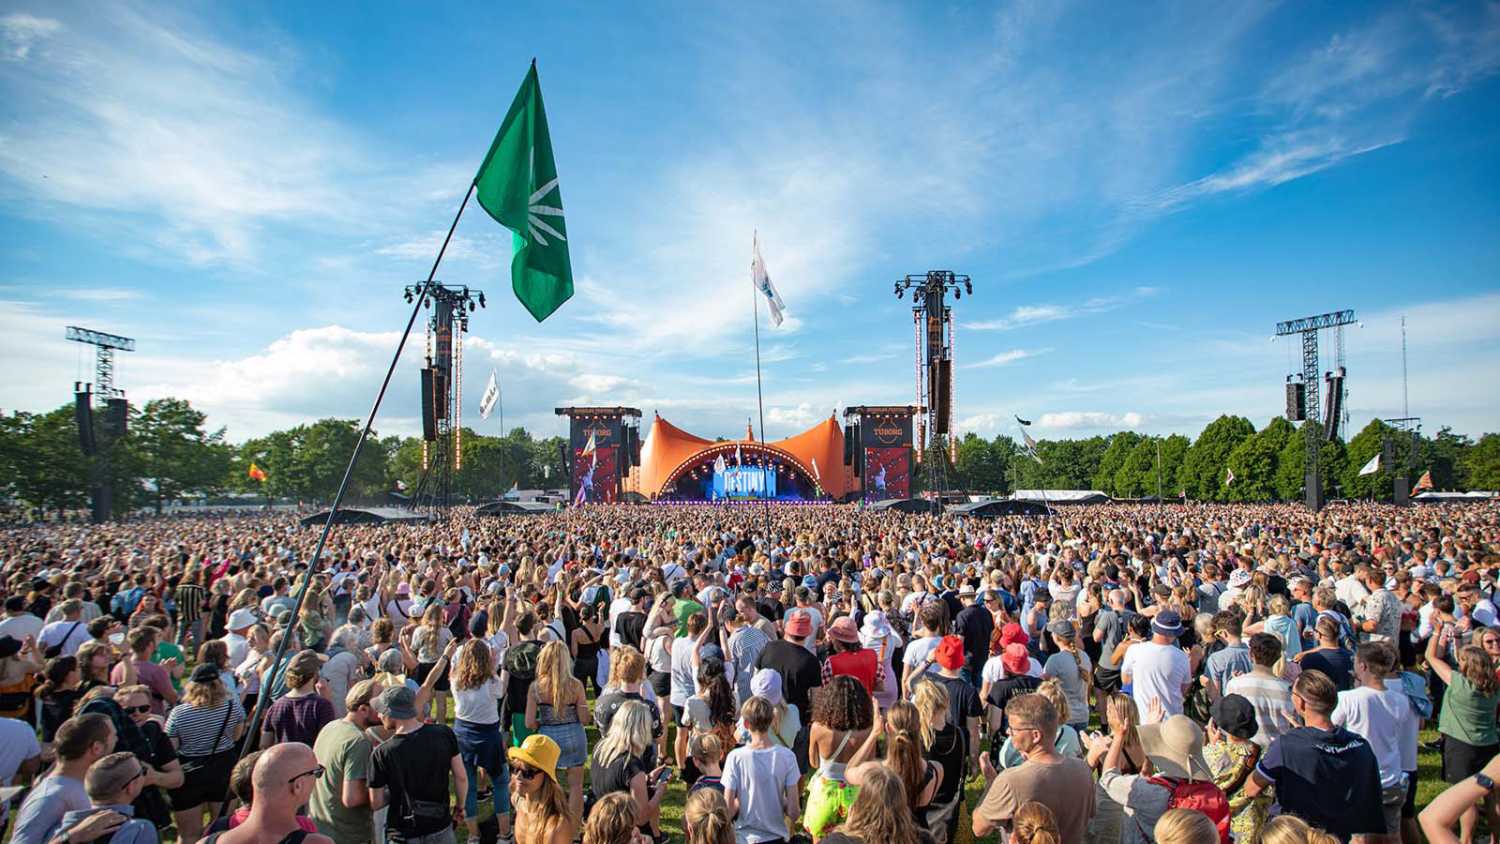 The Orange main stage has a capacity of more than 60,000